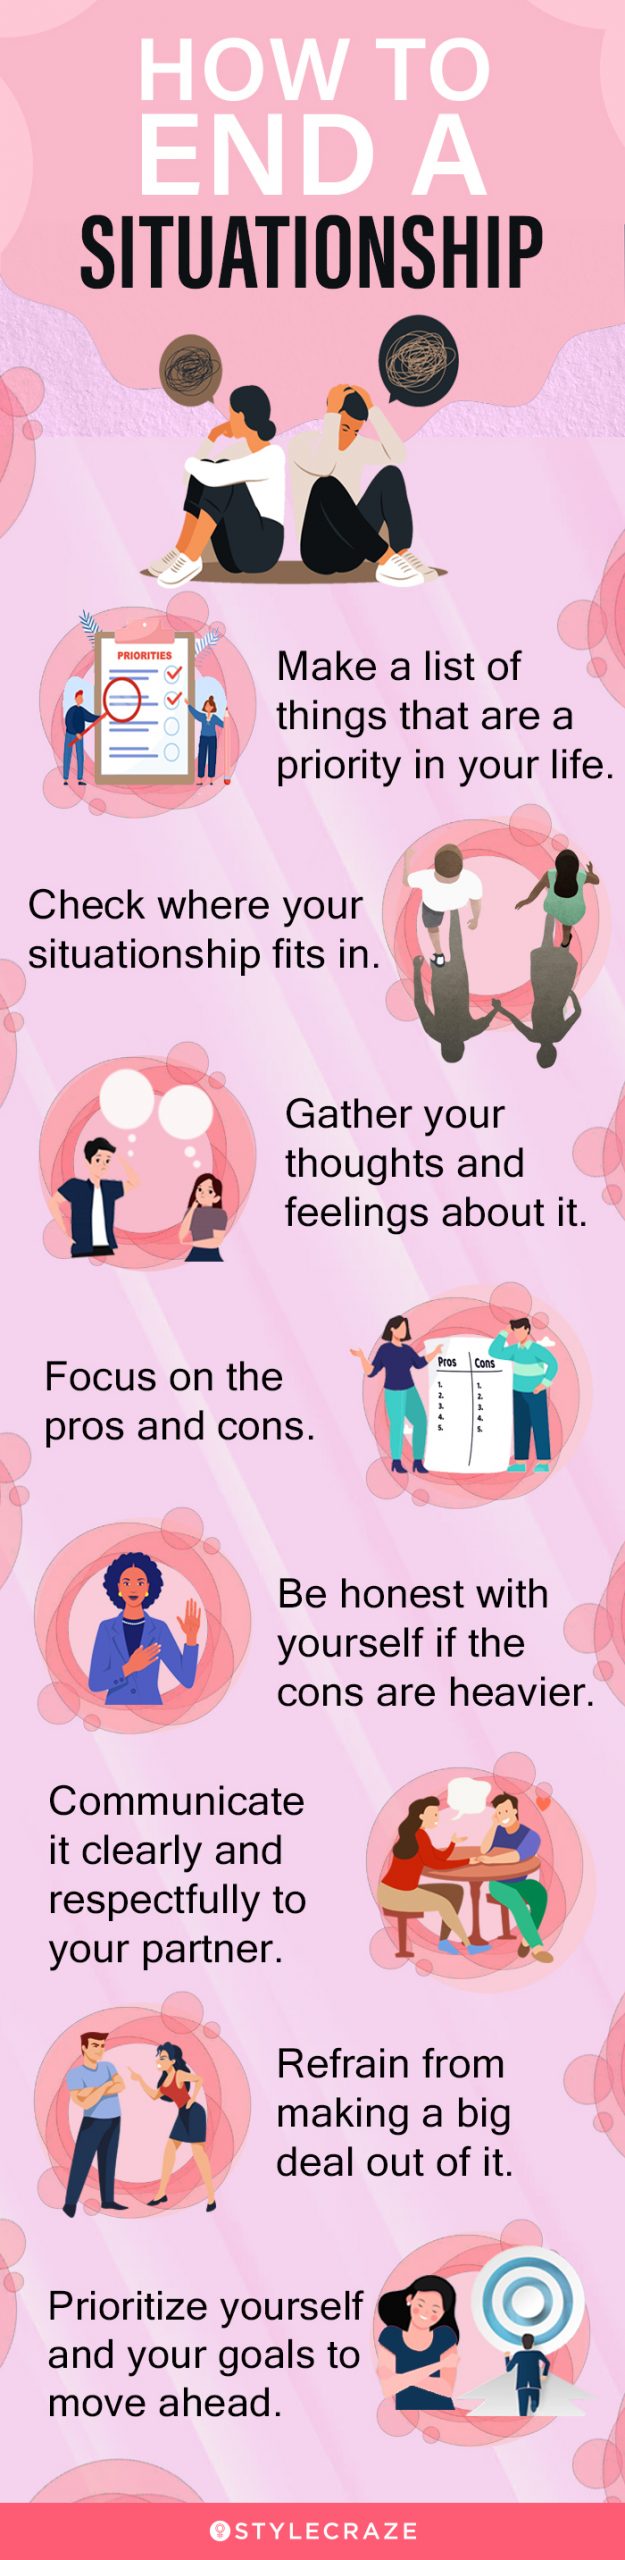 how to end a situationship (infographic)